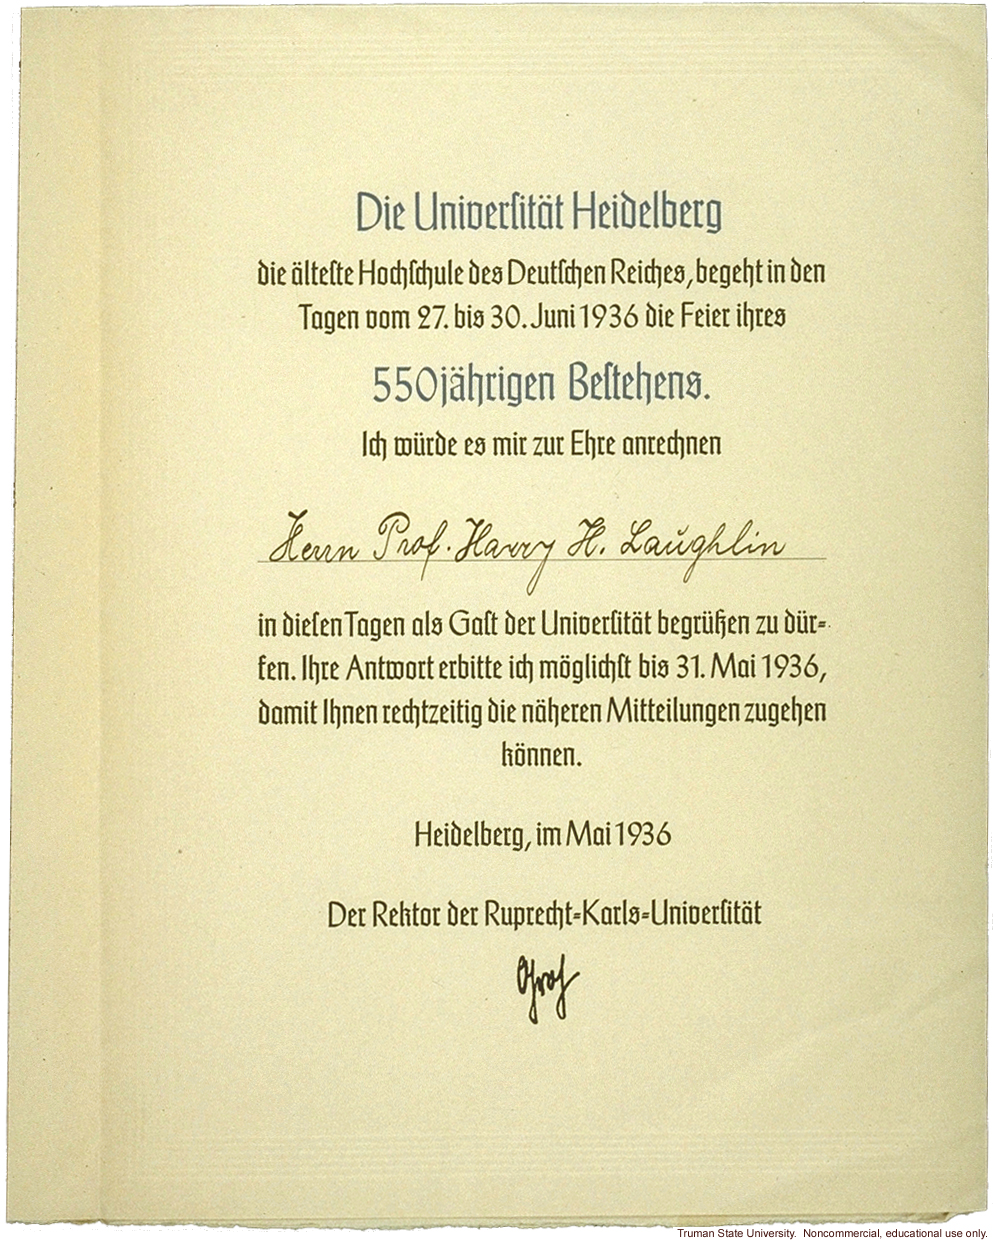 Invitation to Harry Laughlin to attend the 550th Jubilee of University of Heidelberg (at which he was conferred an honorary degree).